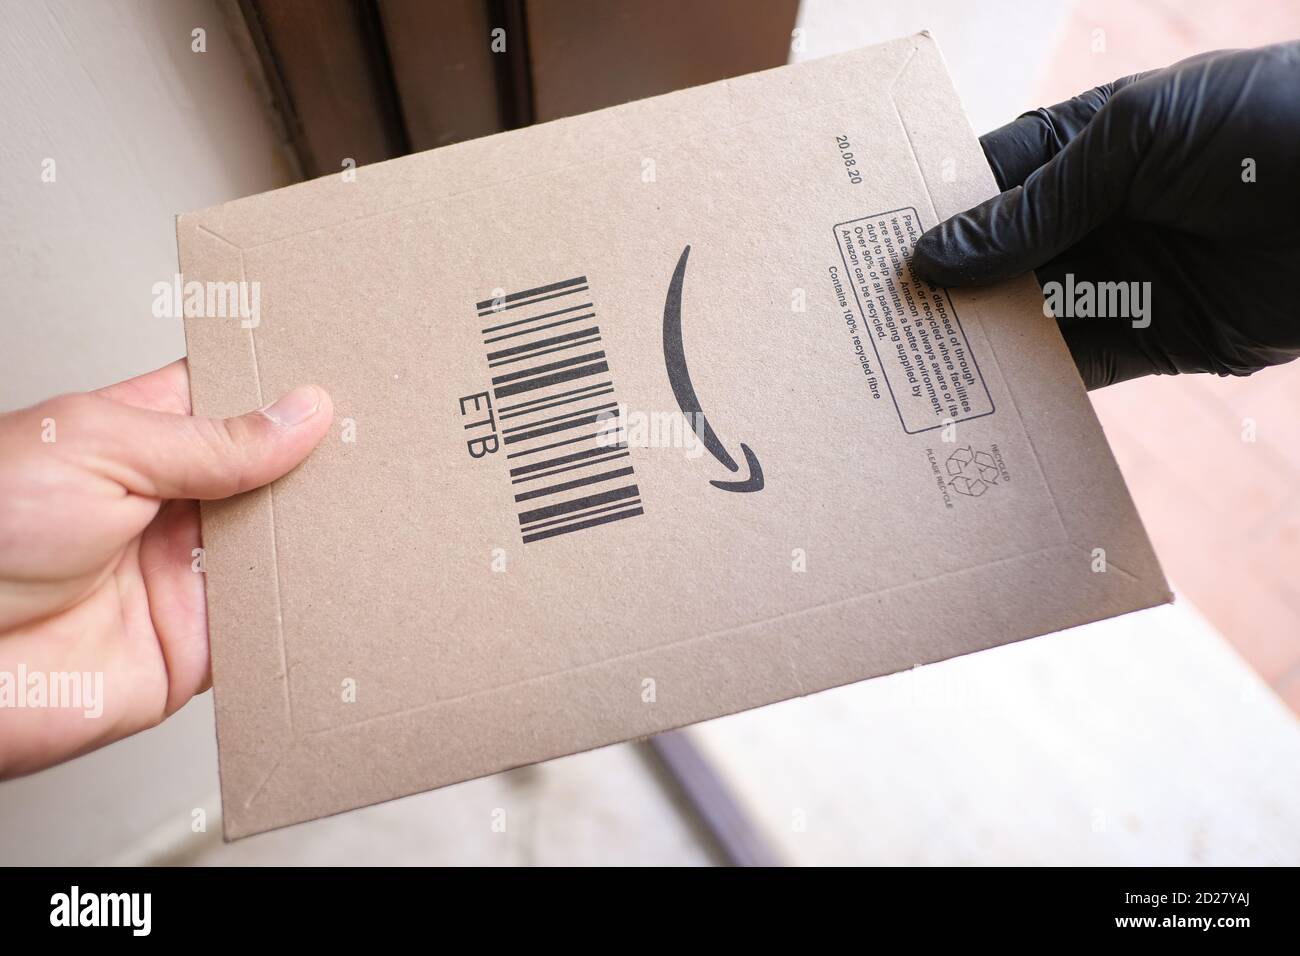 Man receive amazon prime package box as home delivery shipping,e-commerce  Stock Photo